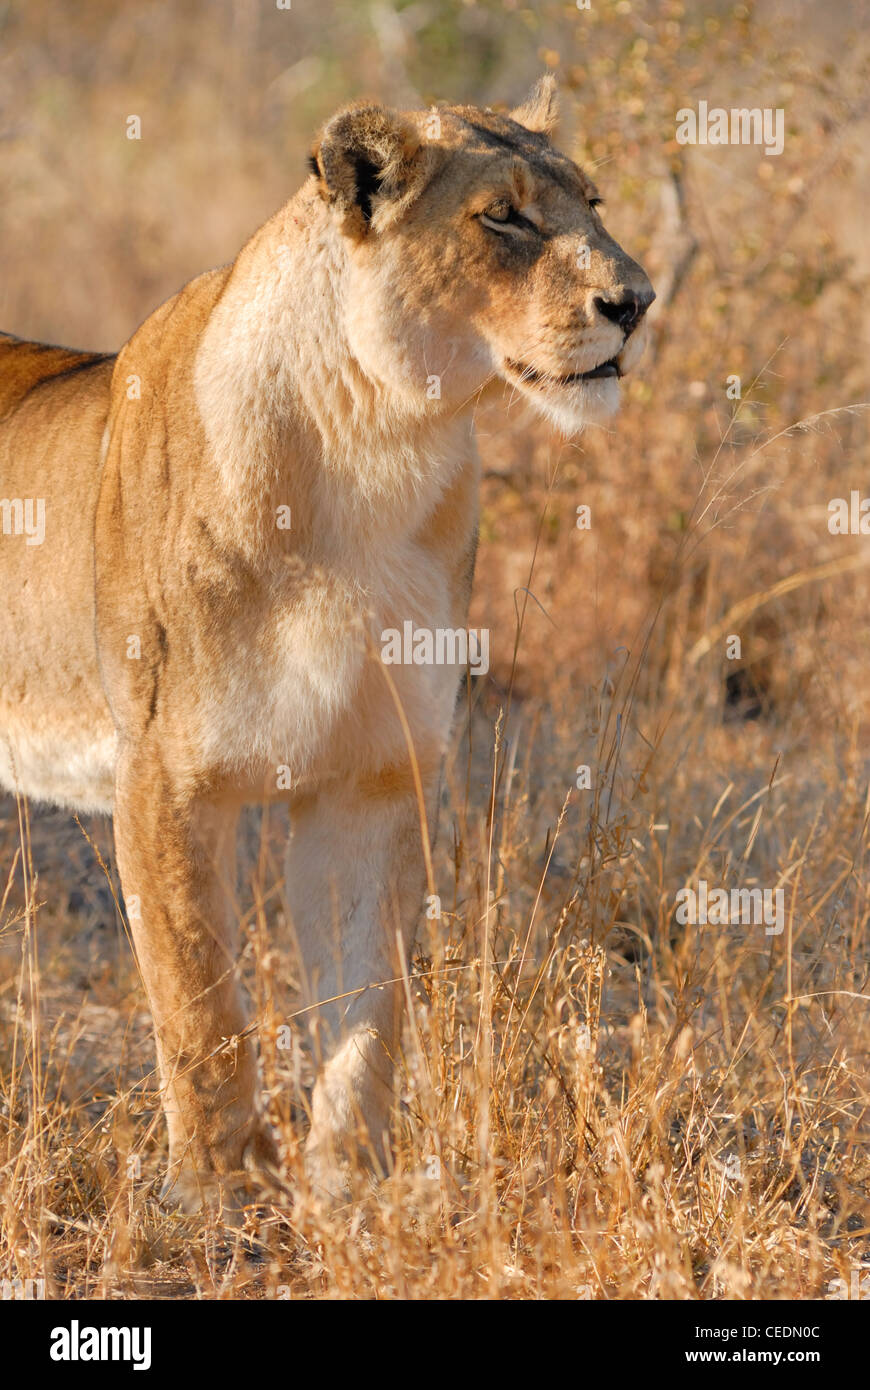 A large lioness standing and watching over her territory before settling down after a long night of hunting. Stock Photo